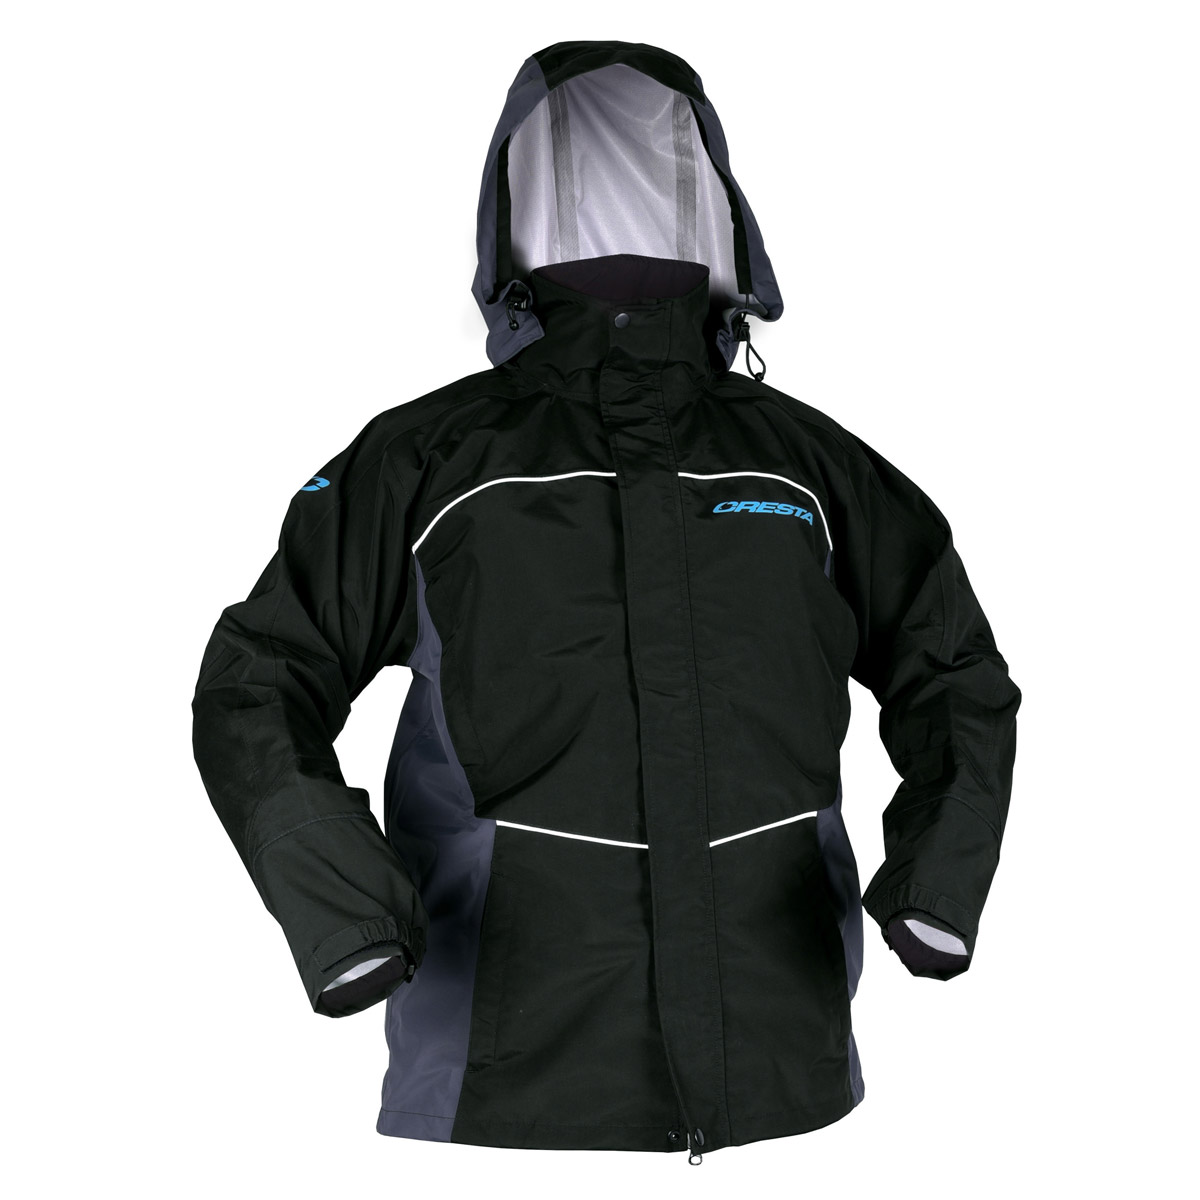 Spro Cresta All Weather Suit